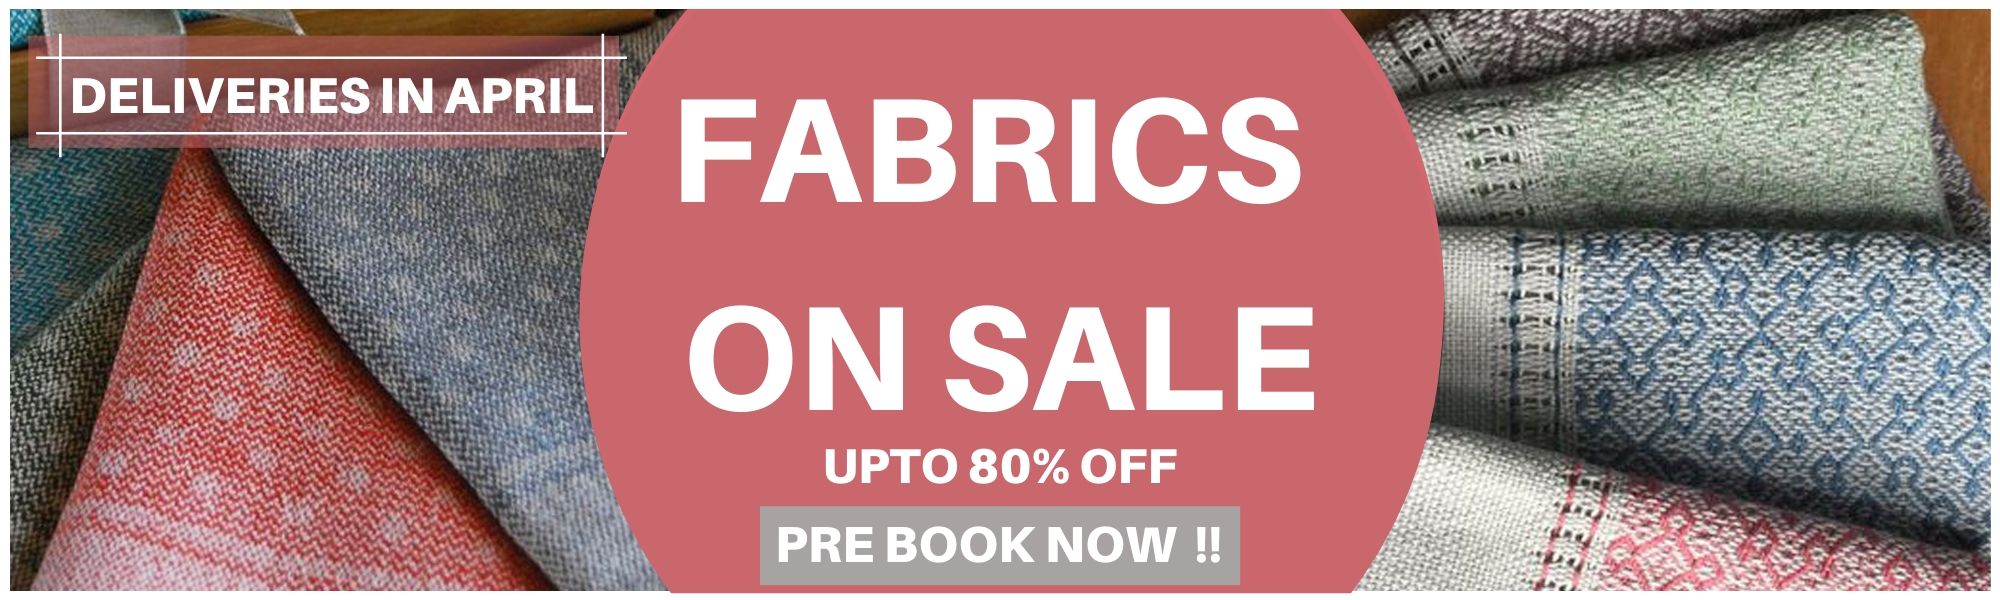 Buy Fabrics, Embroidery Material, Buttons, Beads, Laces-Borders Online ...